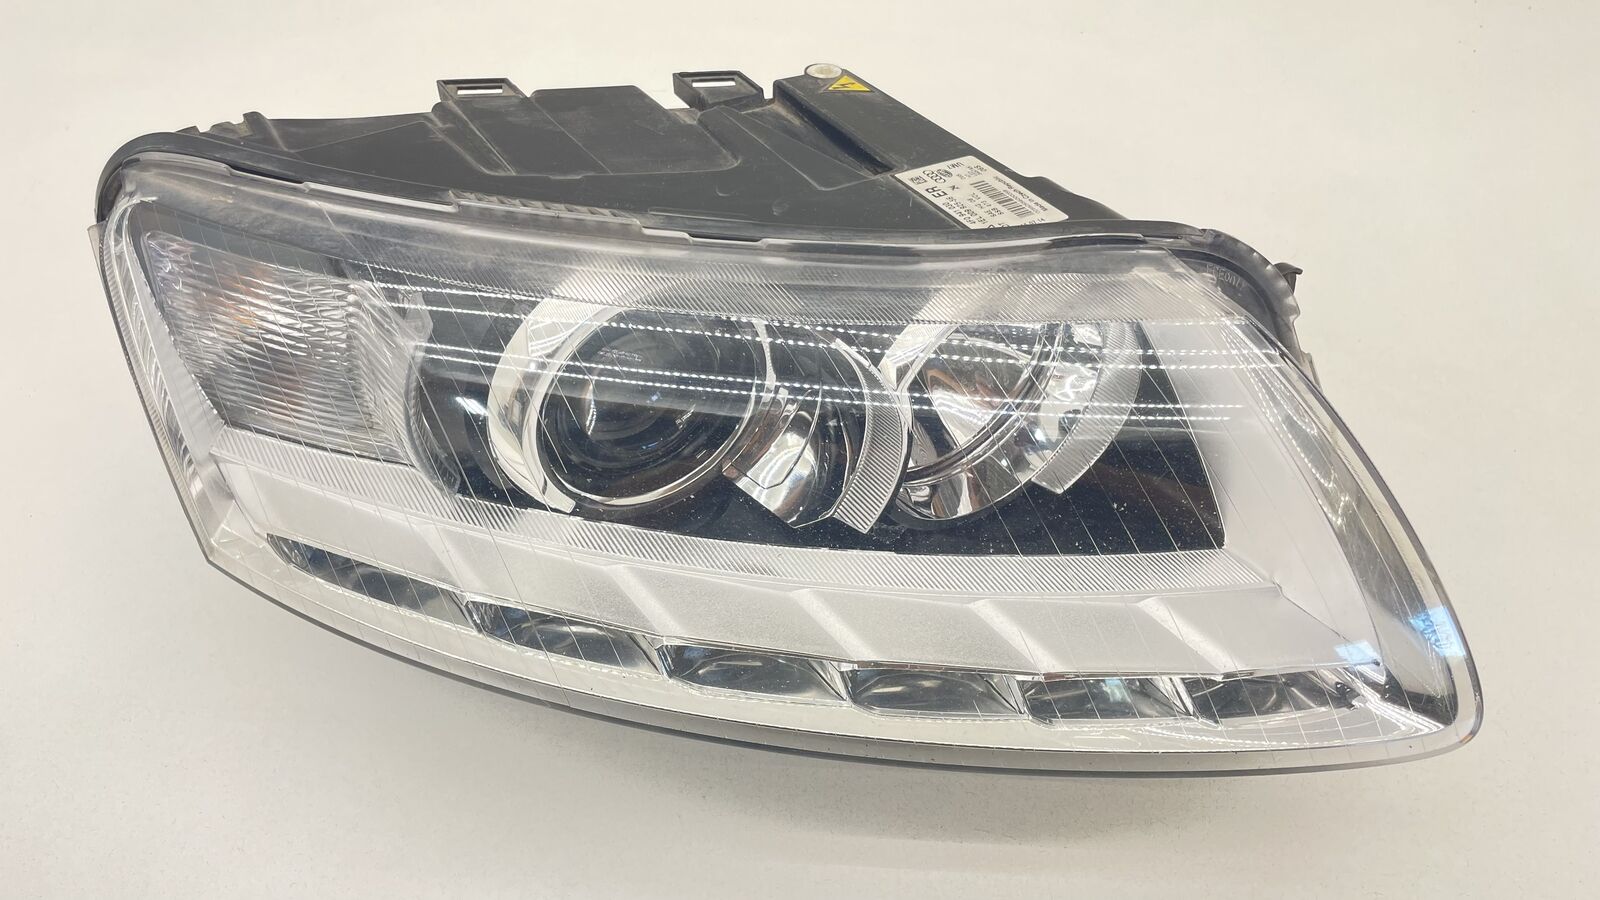 2006-2010 Audi RIGHT SIDE XENON HID HEADLIGHT LAMP ASSEMBLY OEM #4F0941030